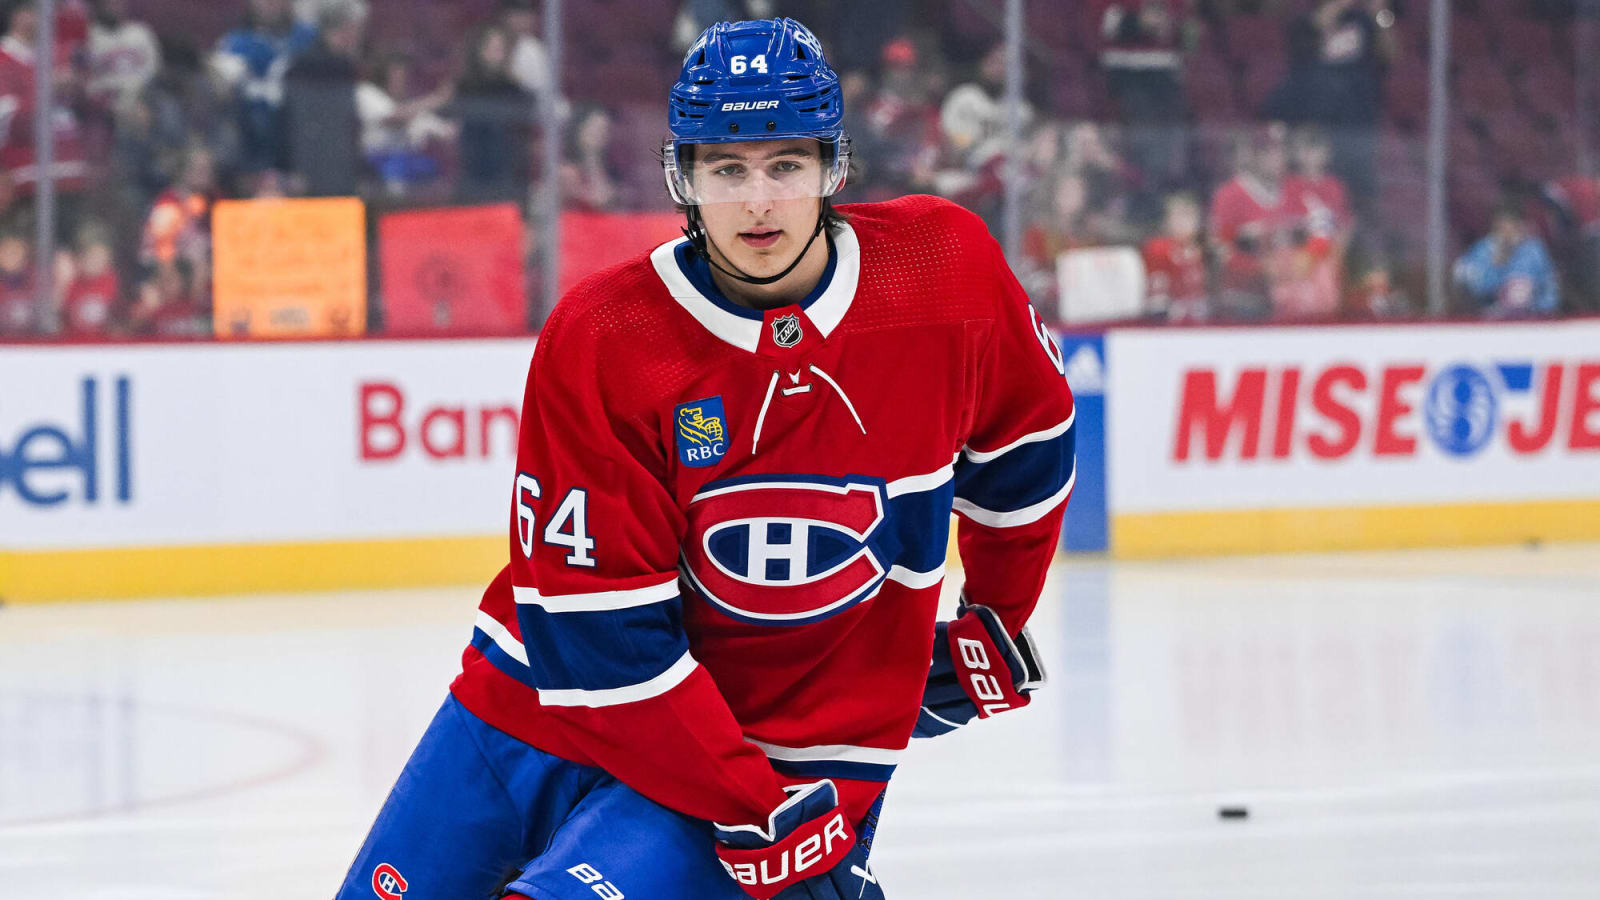 Canadiens Loan Prospect Reinbacher To Laval, Potential Pairings